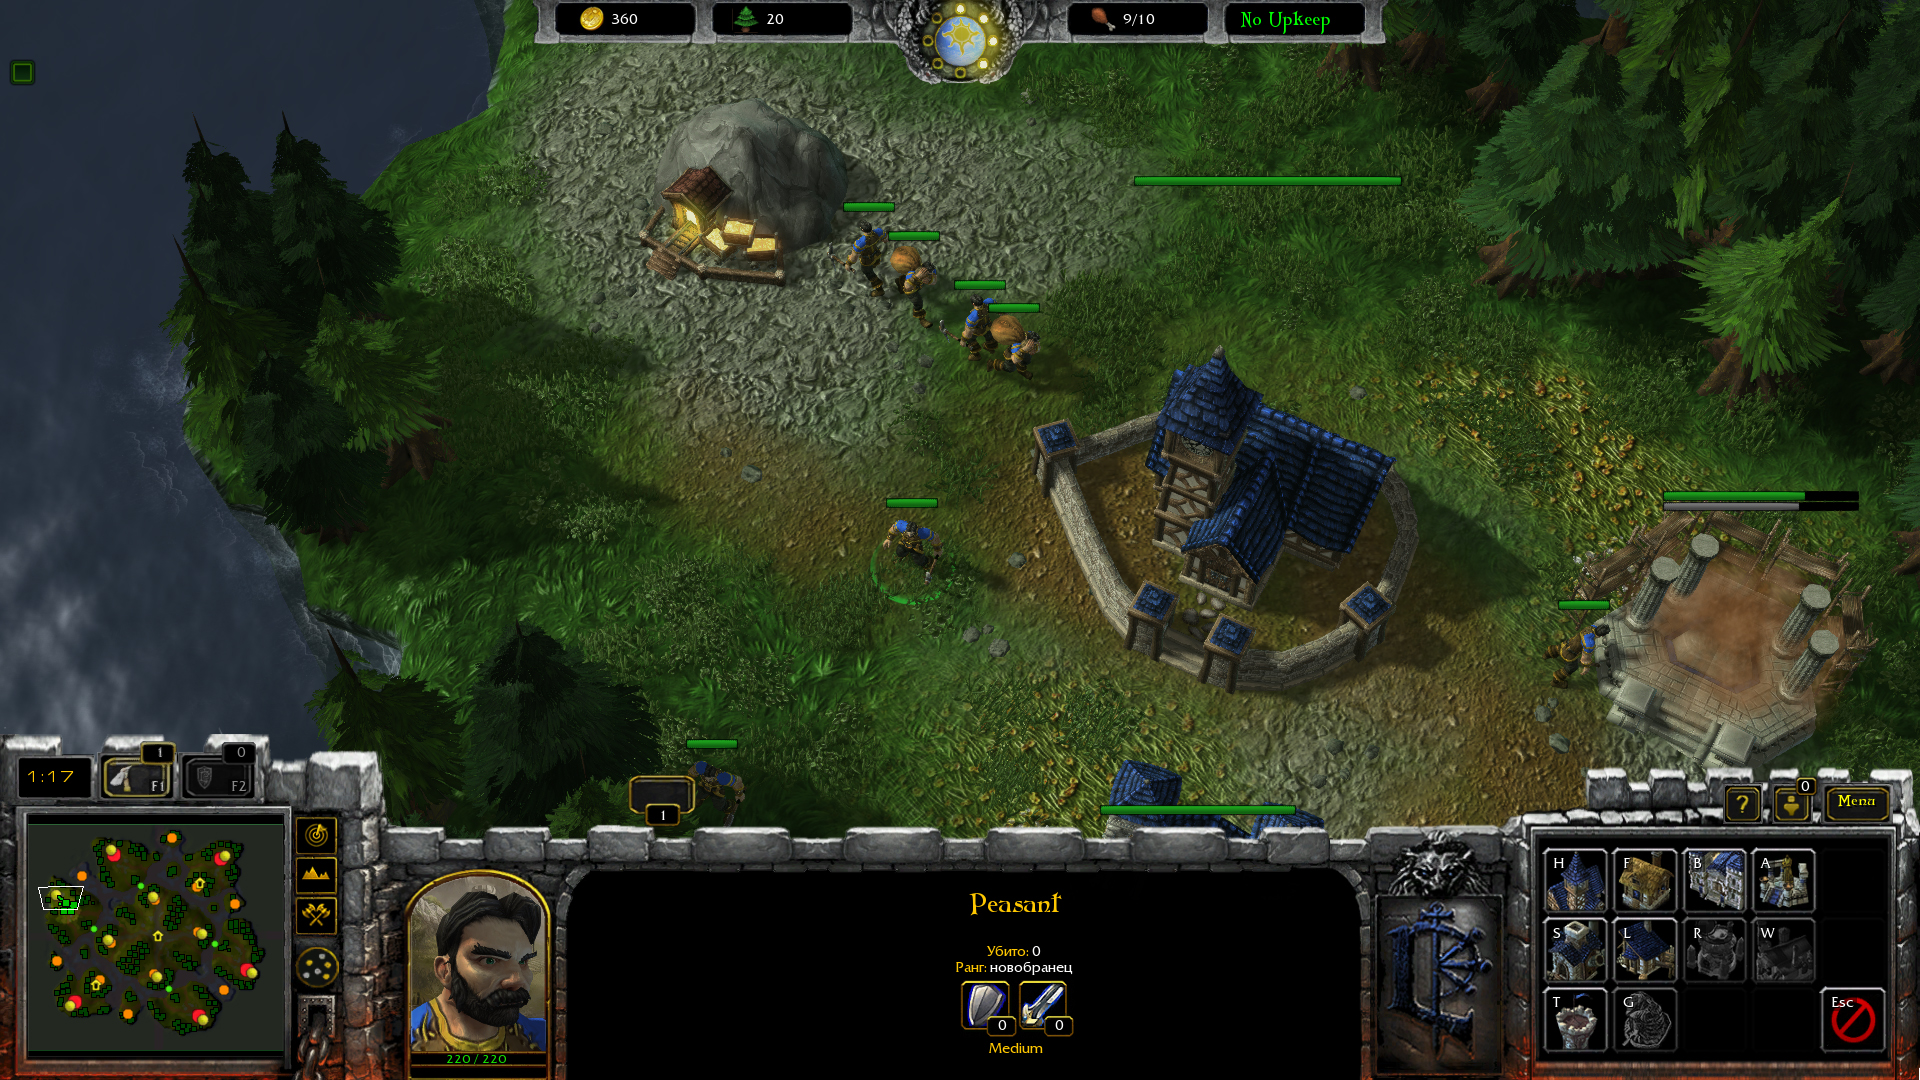 Models and icons are close to the original WC3